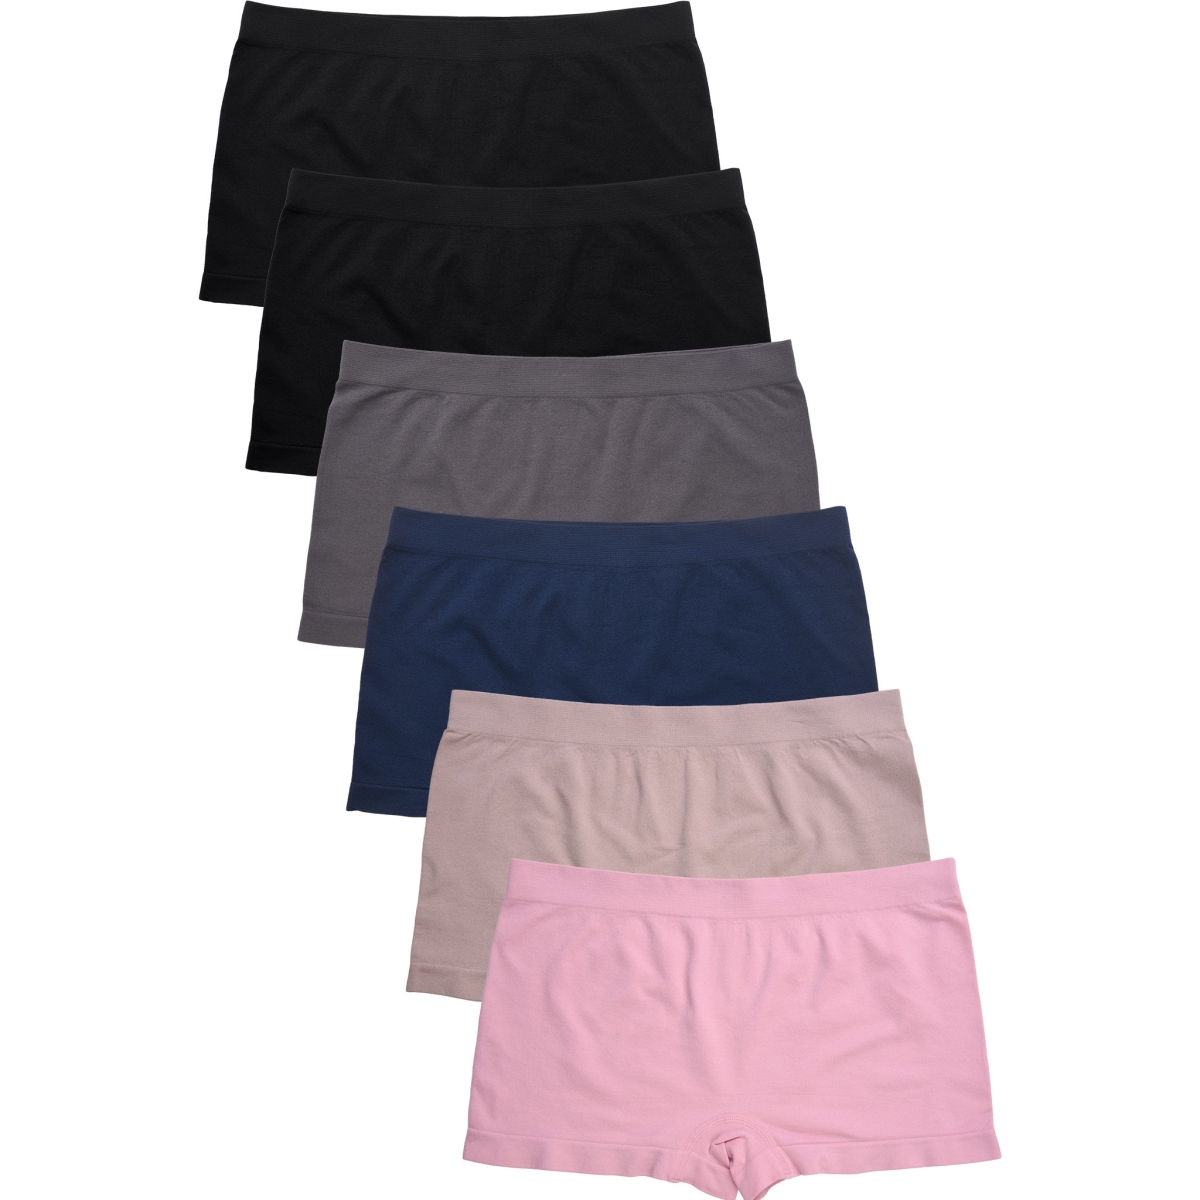 Picture of 247 Frenzy 247-LP0230SB4 Womens Essentials Seamless Nylon Stretch Boyshort Panty Underwear - Assorted Color - One Size - Pack of 6